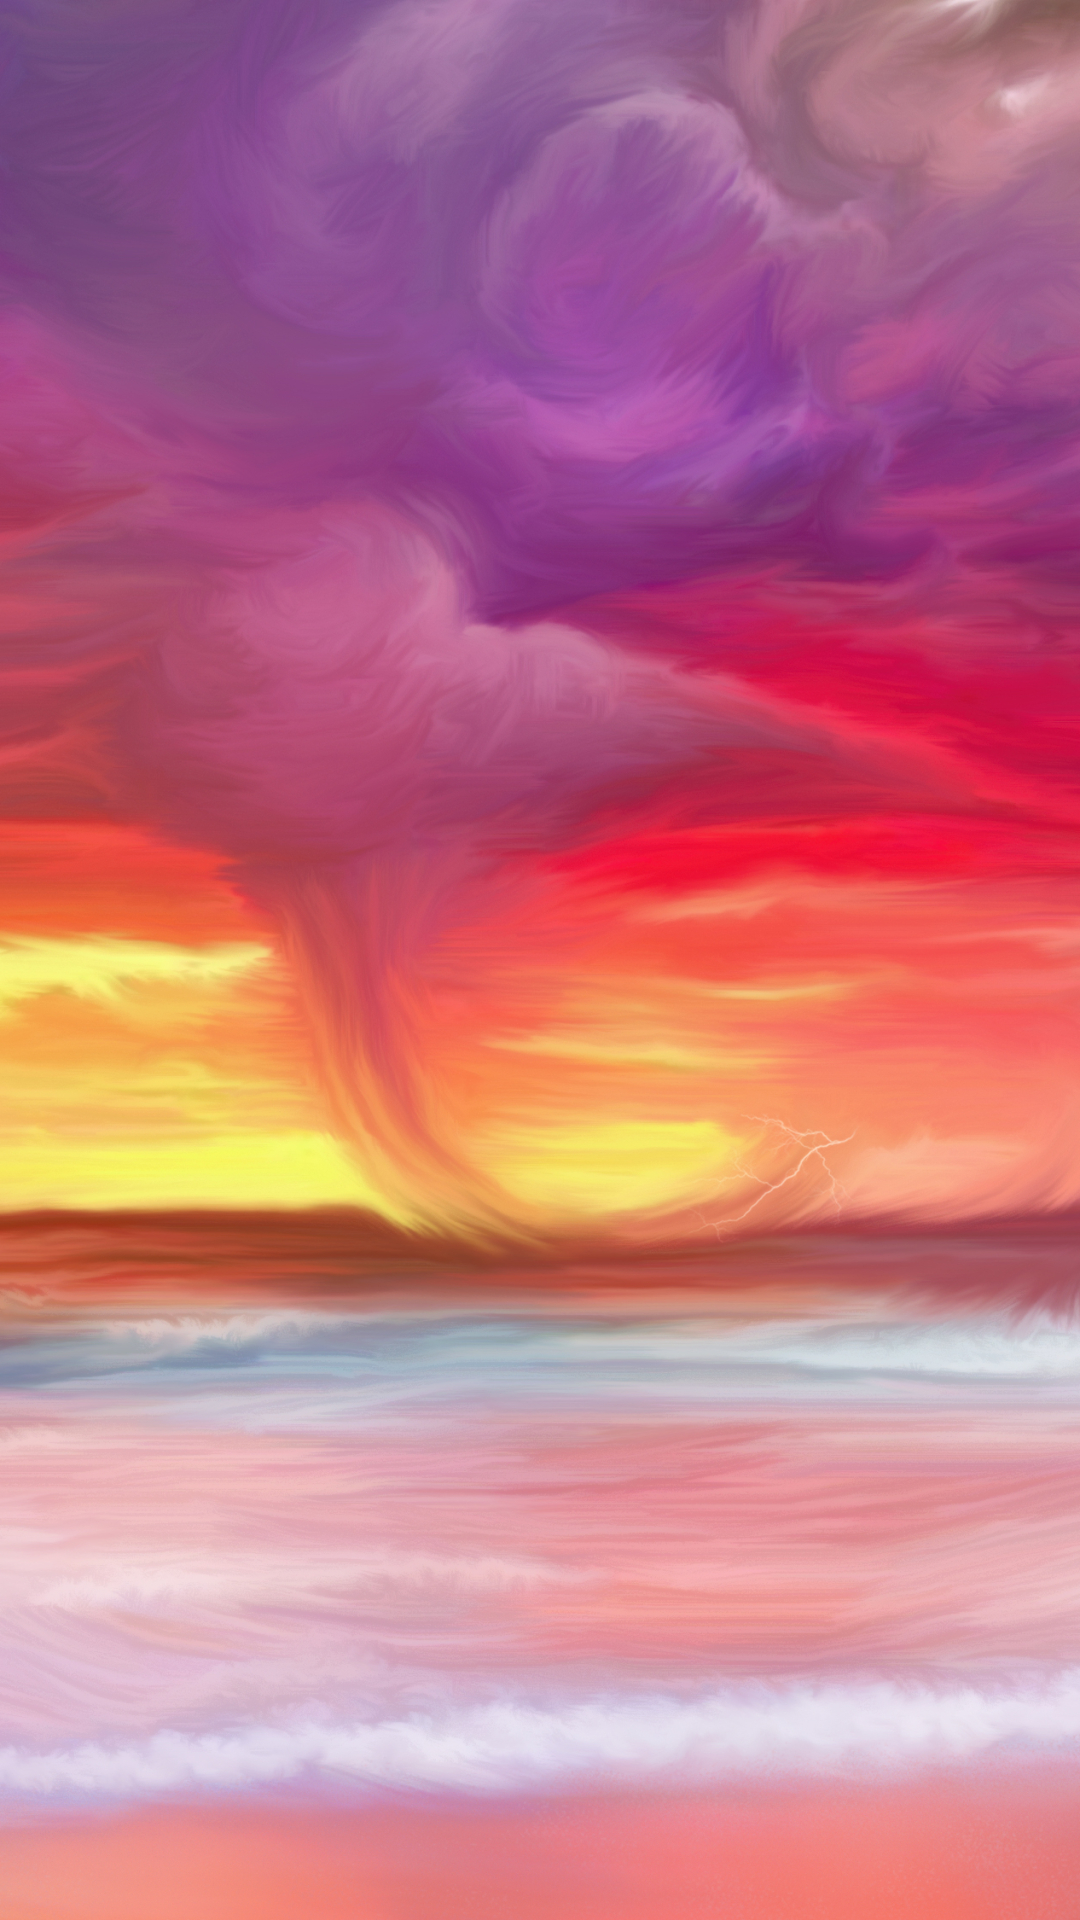 Painting of a Storm over the Ocean at Sunset